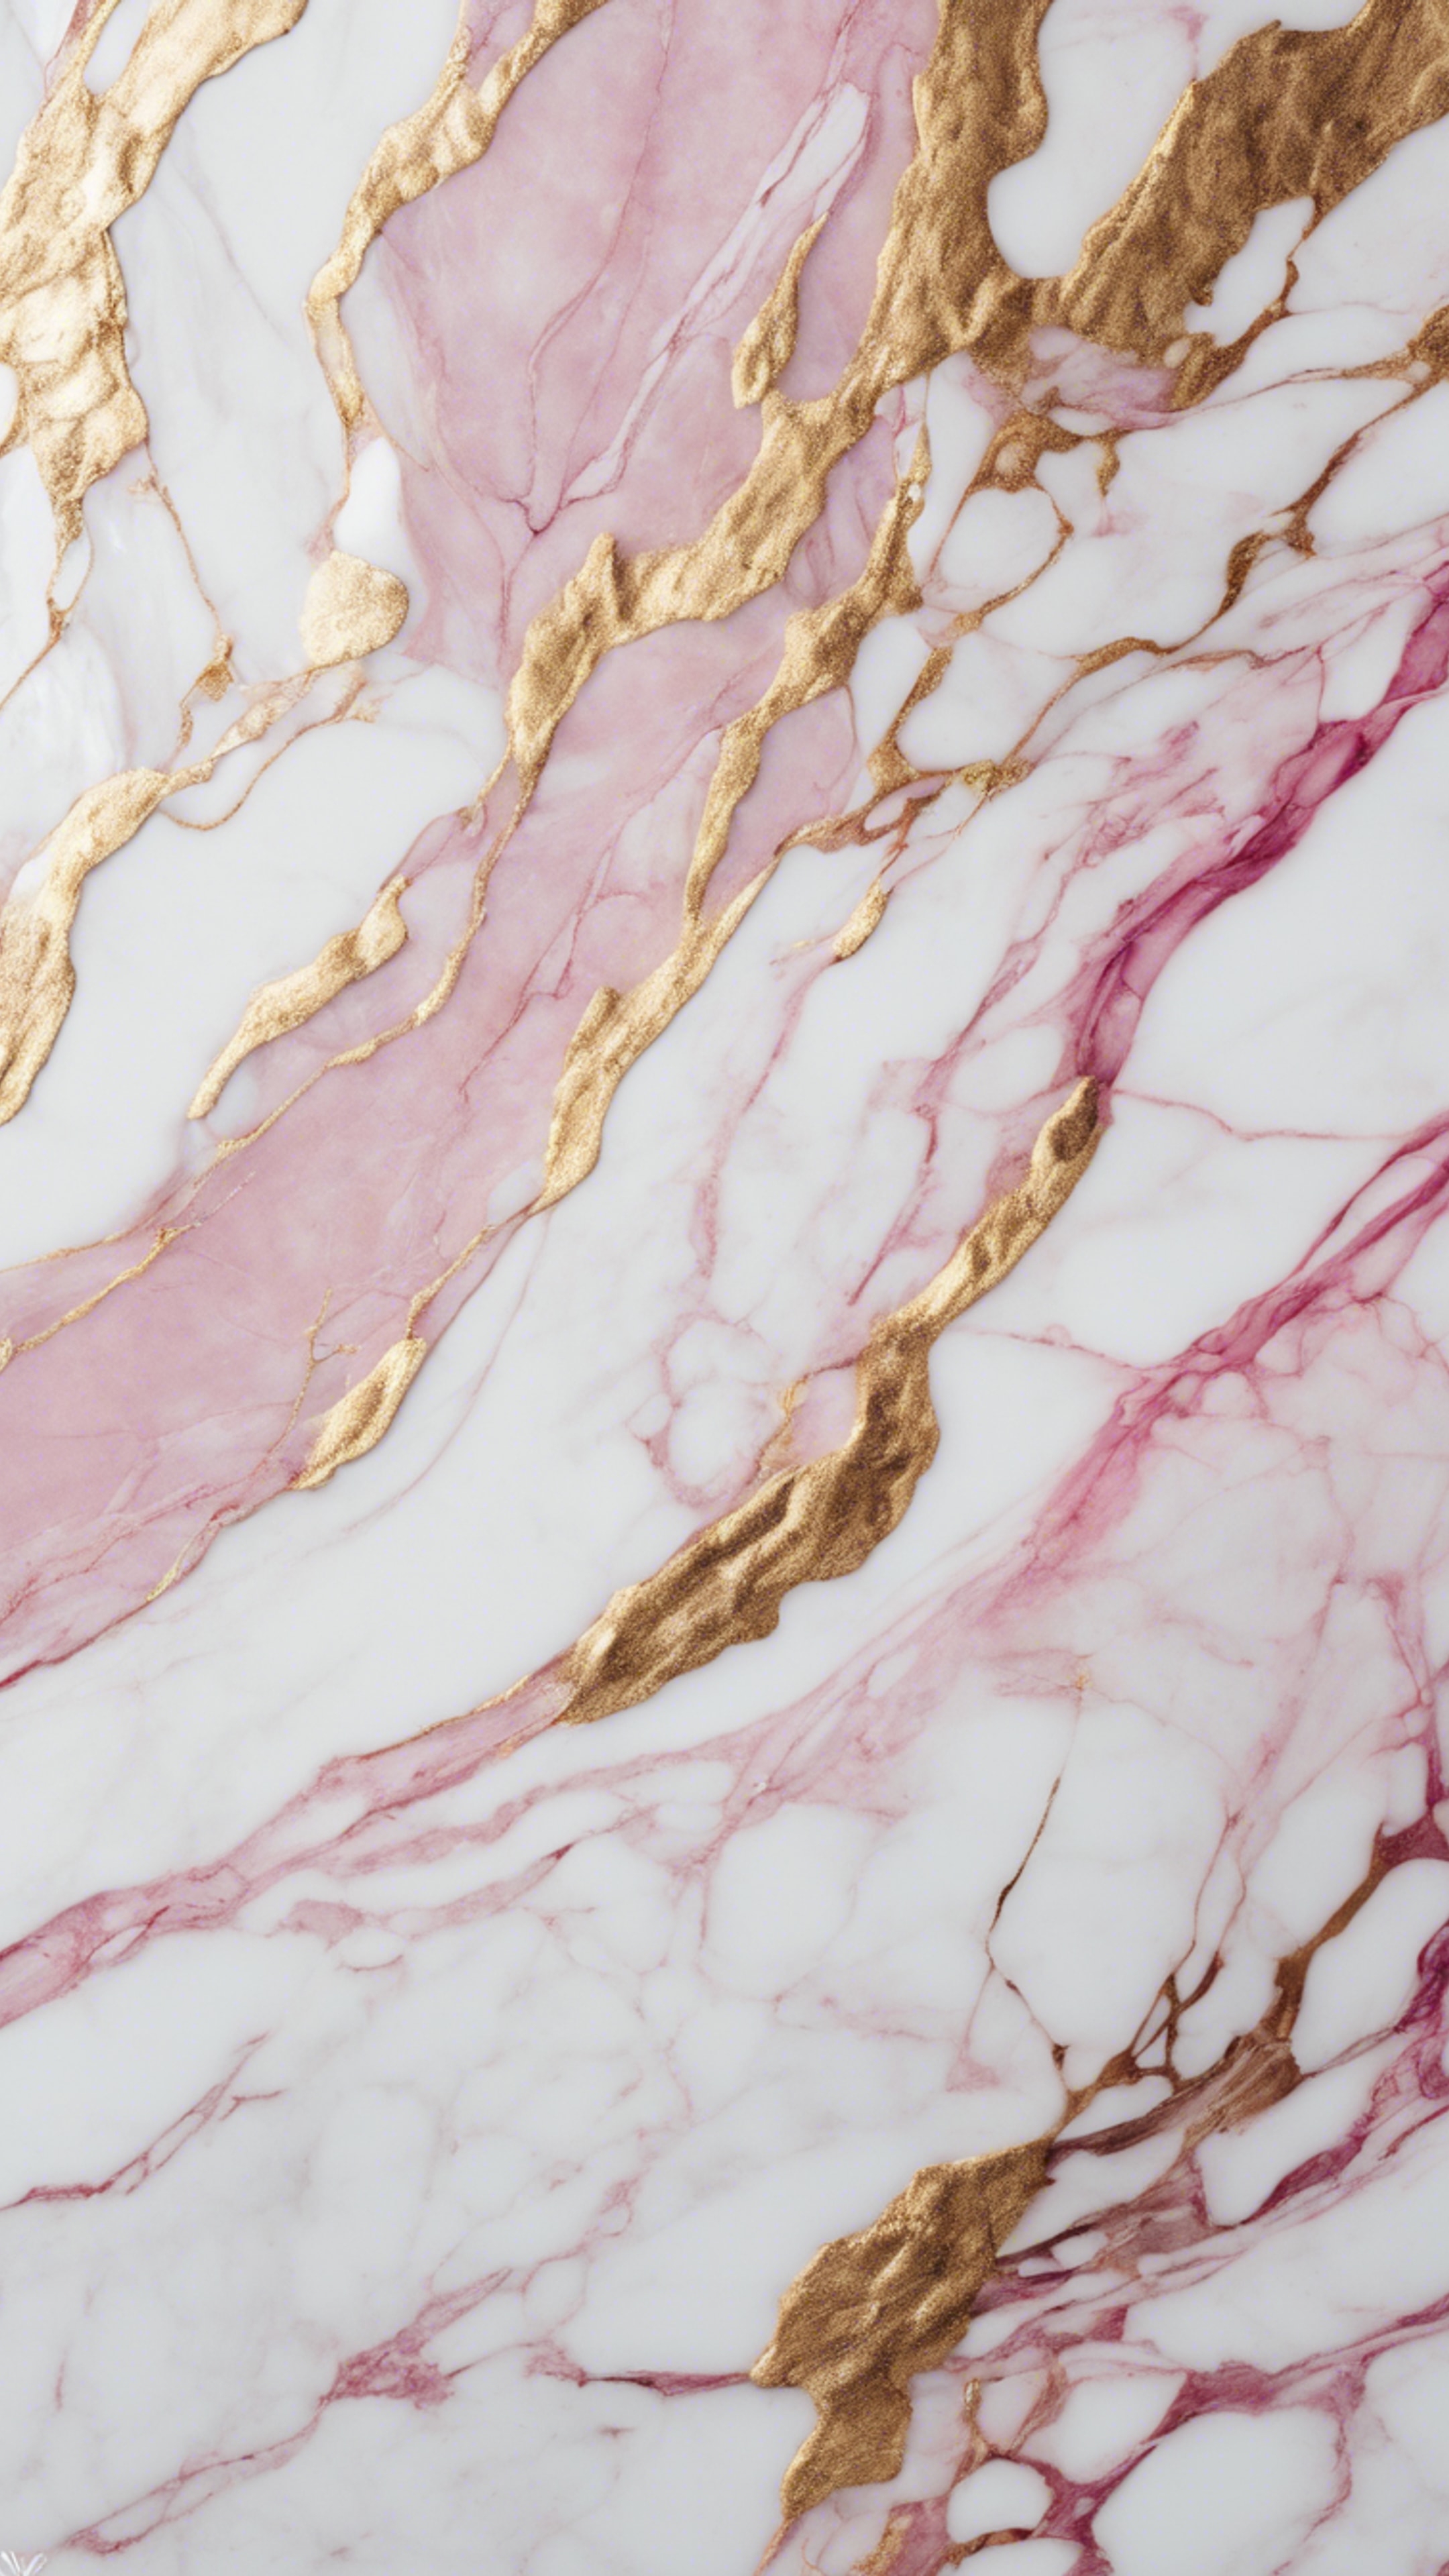 A close-up view of a white marble texture with subtle pink and gold streaks Hintergrund[94d0ed0dfacd4436a1ca]